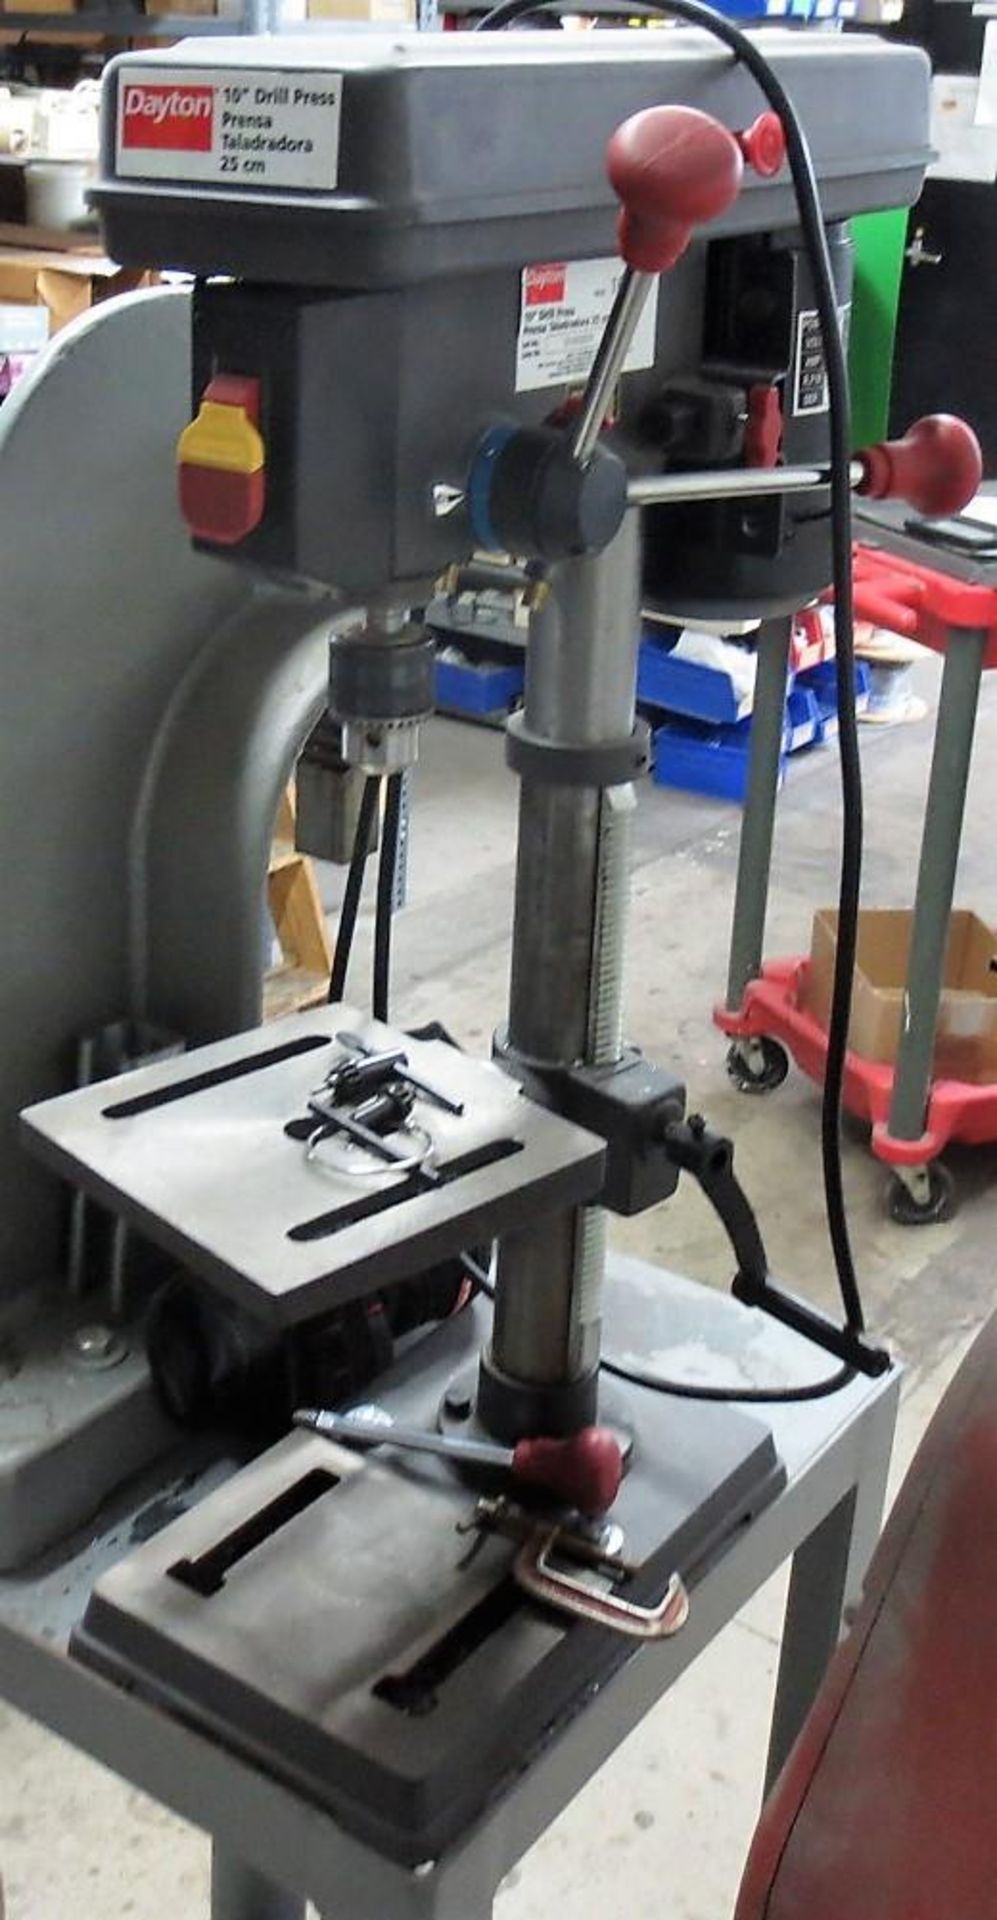 Stand With Arbor Press and Dayton 10" Drill Press Model 16N196, 120V, 1 PH ( Loc. On Mezzanine buyer - Image 3 of 5